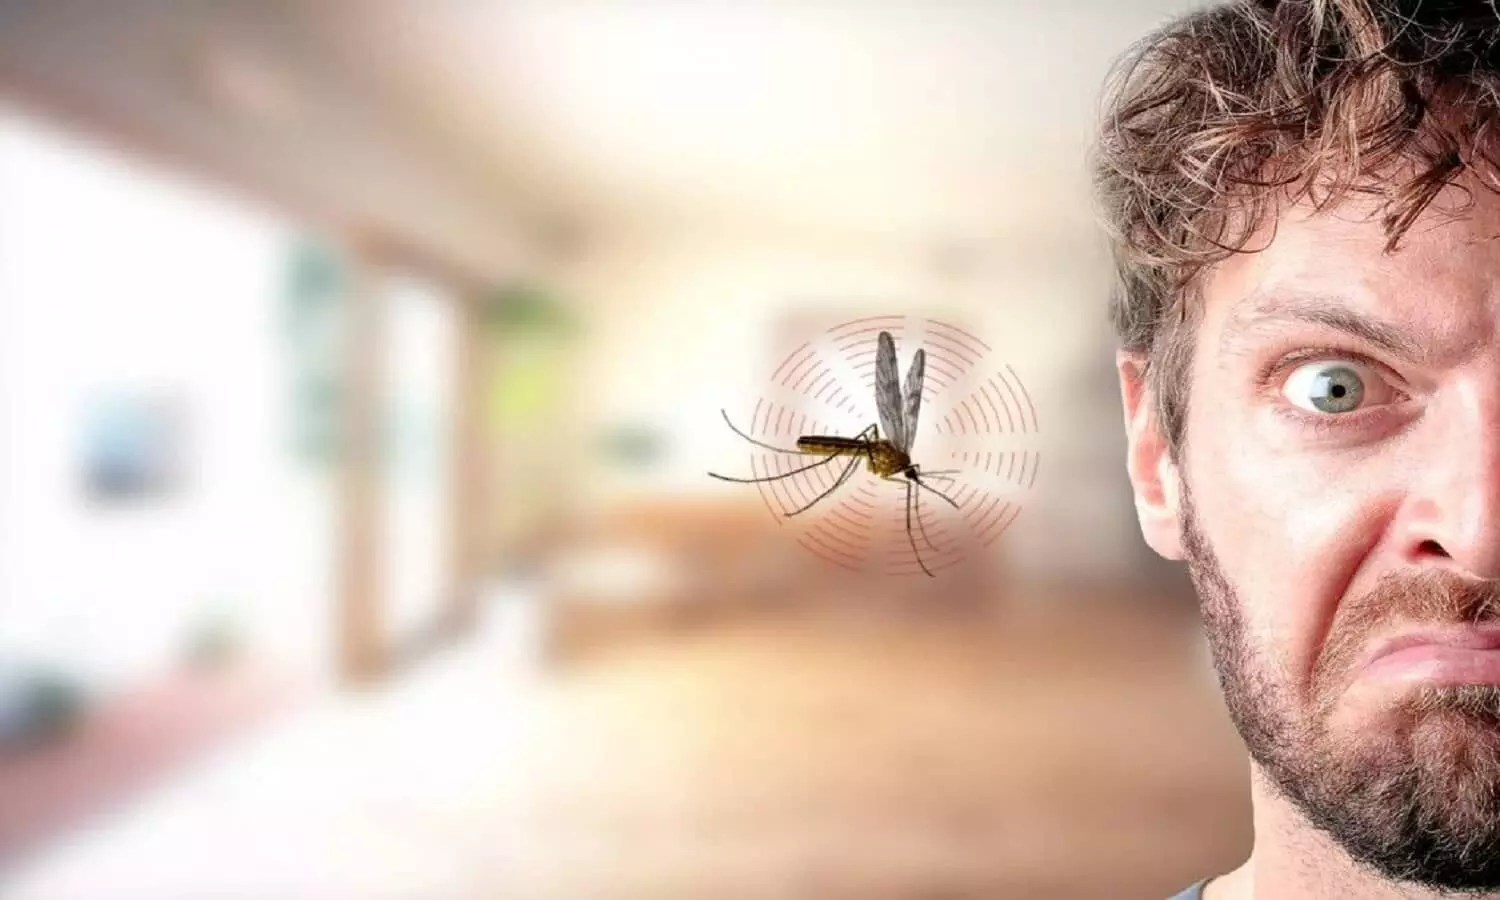 mosquito facts in hindi